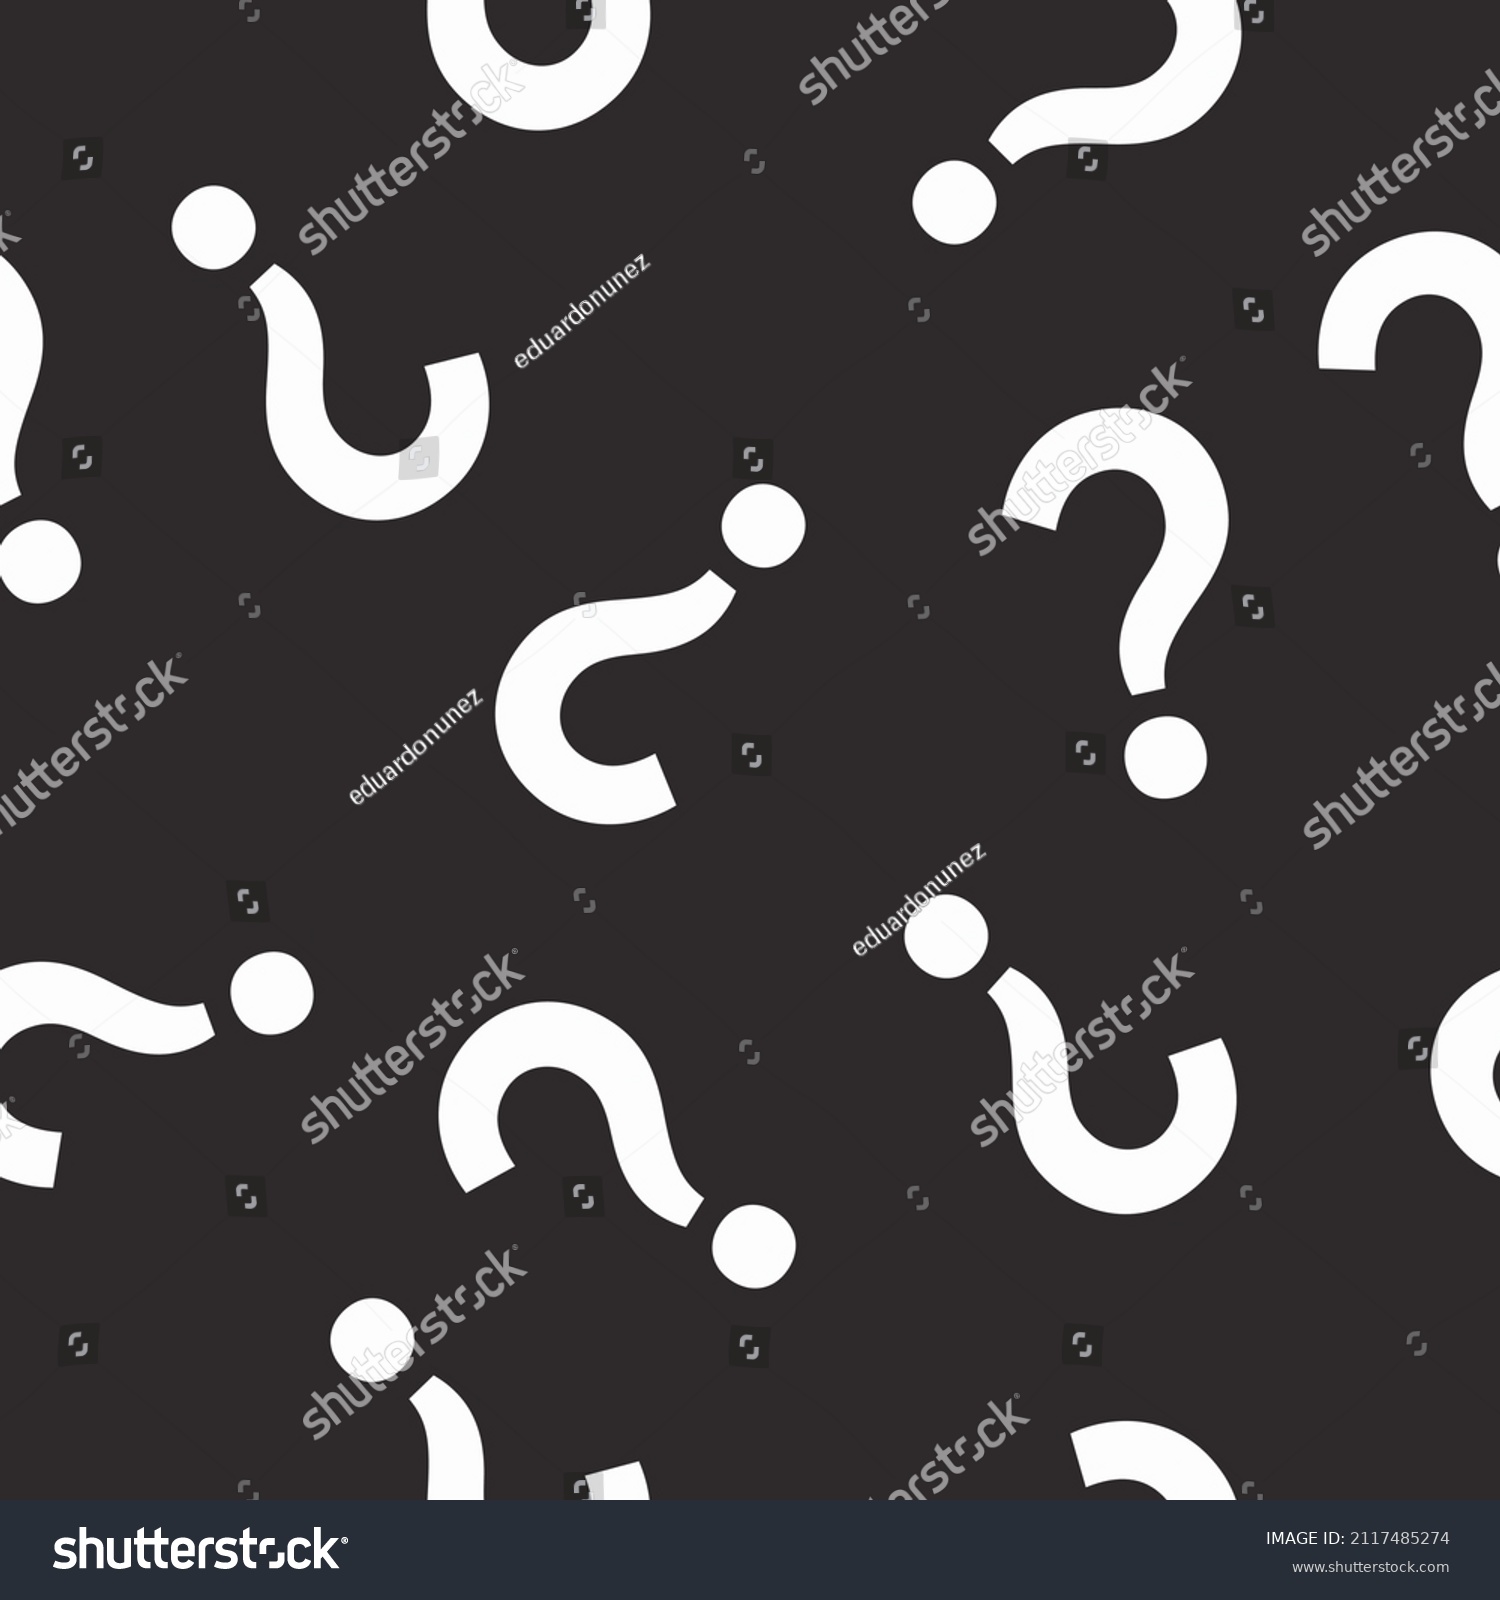 Question Mark Pattern Vector Seamless Pattern Royalty Free Stock Vector 2117485274 9237